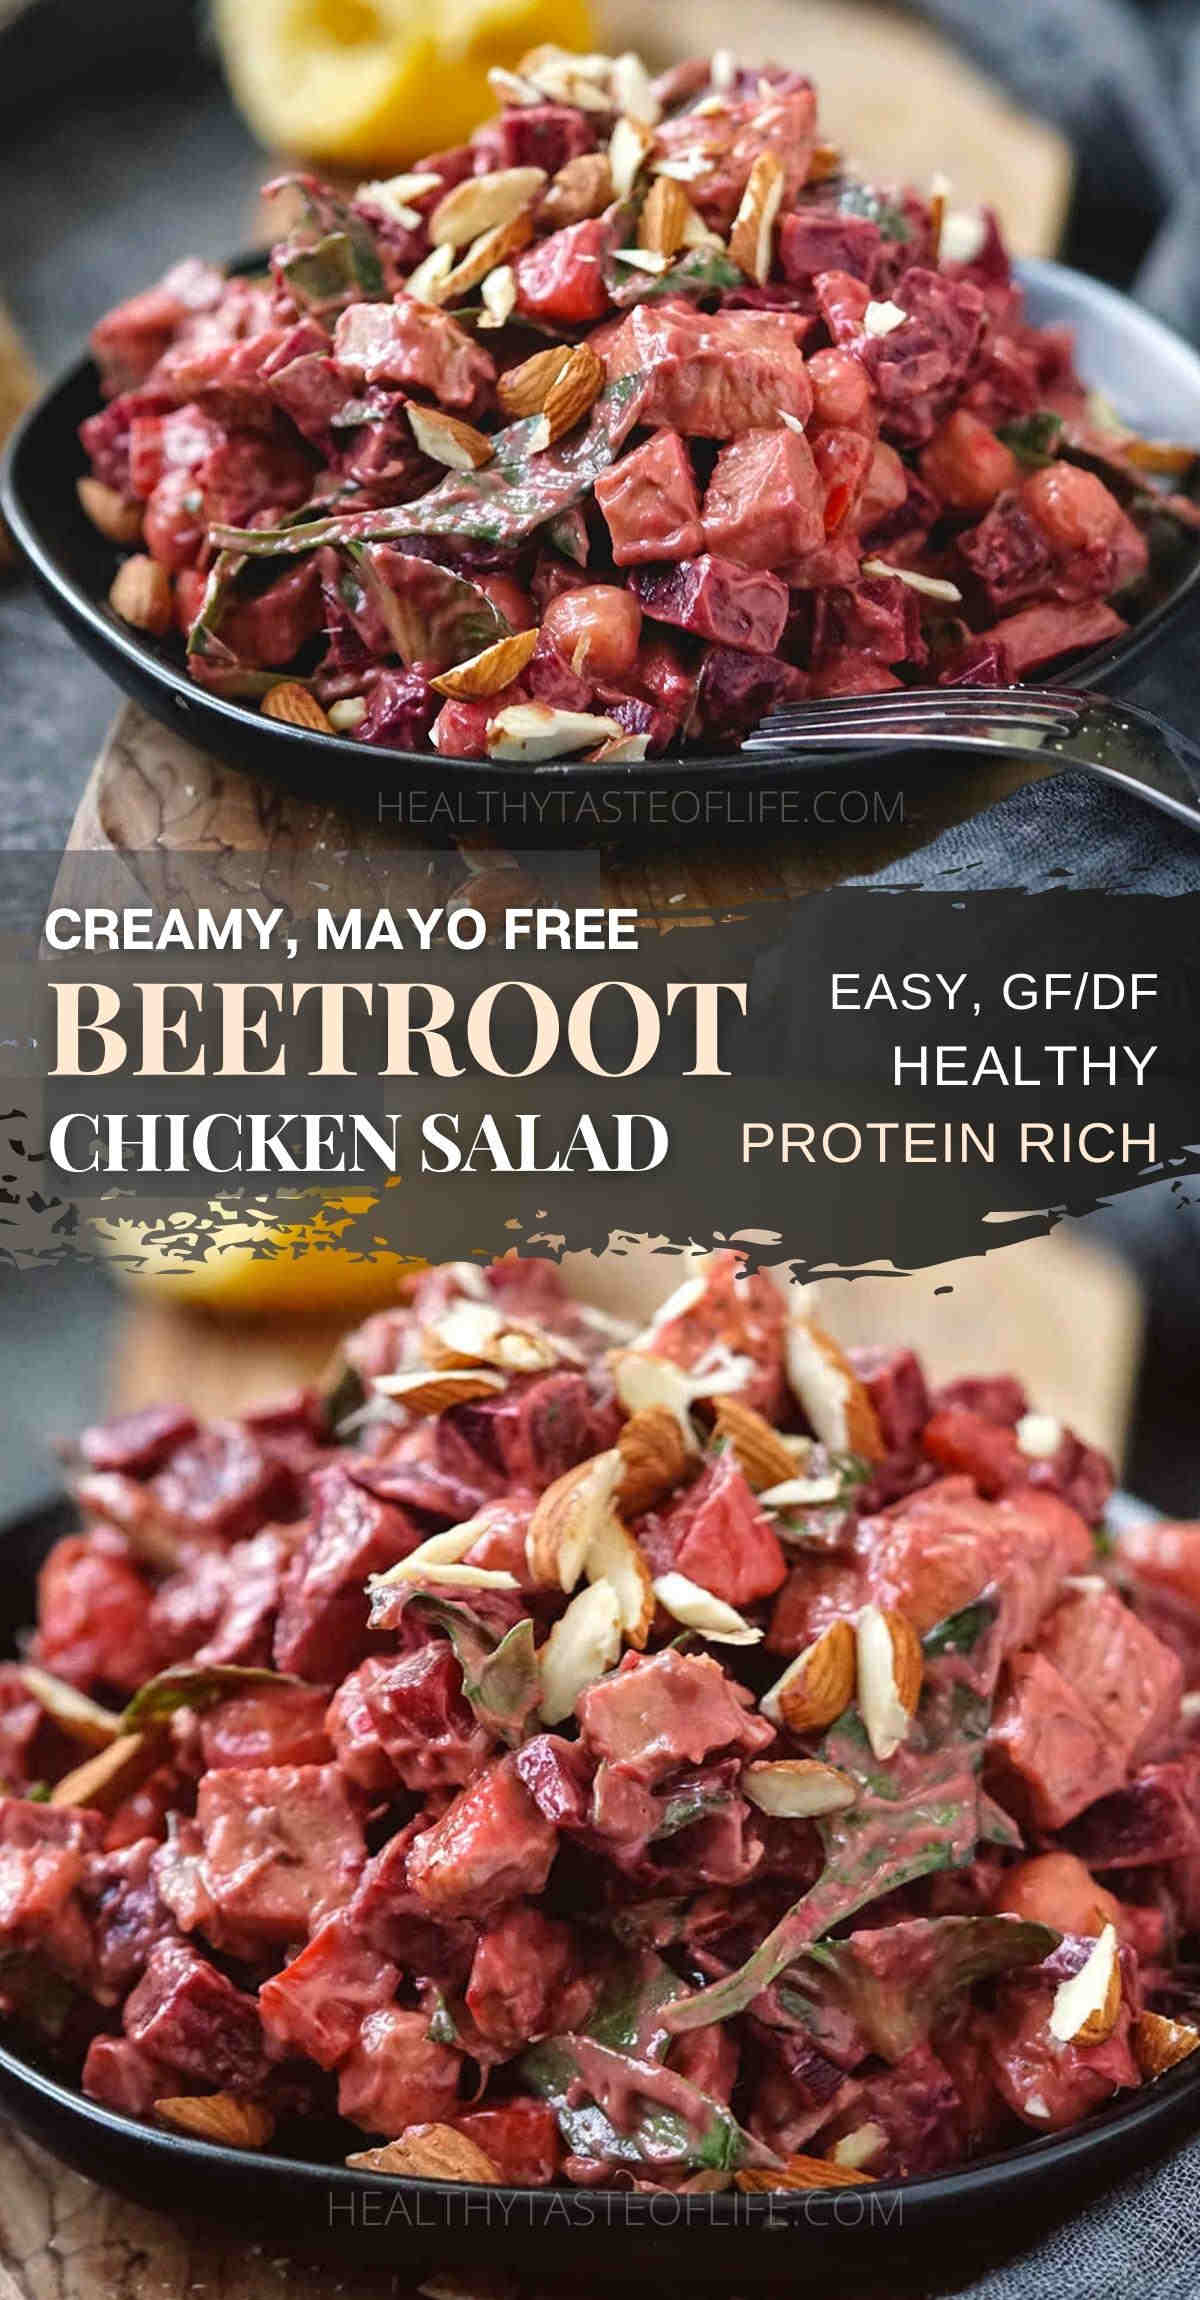 This protein-rich chicken beet salad recipe features cooked beets, roasted chicken, and chickpeas enriched with a healthy creamy avocado dressing. The chicken and beet salad can be enjoyed as side dish or as a super filling meal for lunch or dinner. Making this beet salad with chicken is super easy and will keep you full longer #beetandchickensalad #chickenbeetsalad #beetchickensalad #beetsalad #dairyfreechickensalad #coldbeetsalad #easybeetsalad #beetsaladrecipe #chickenandbeetrecipe